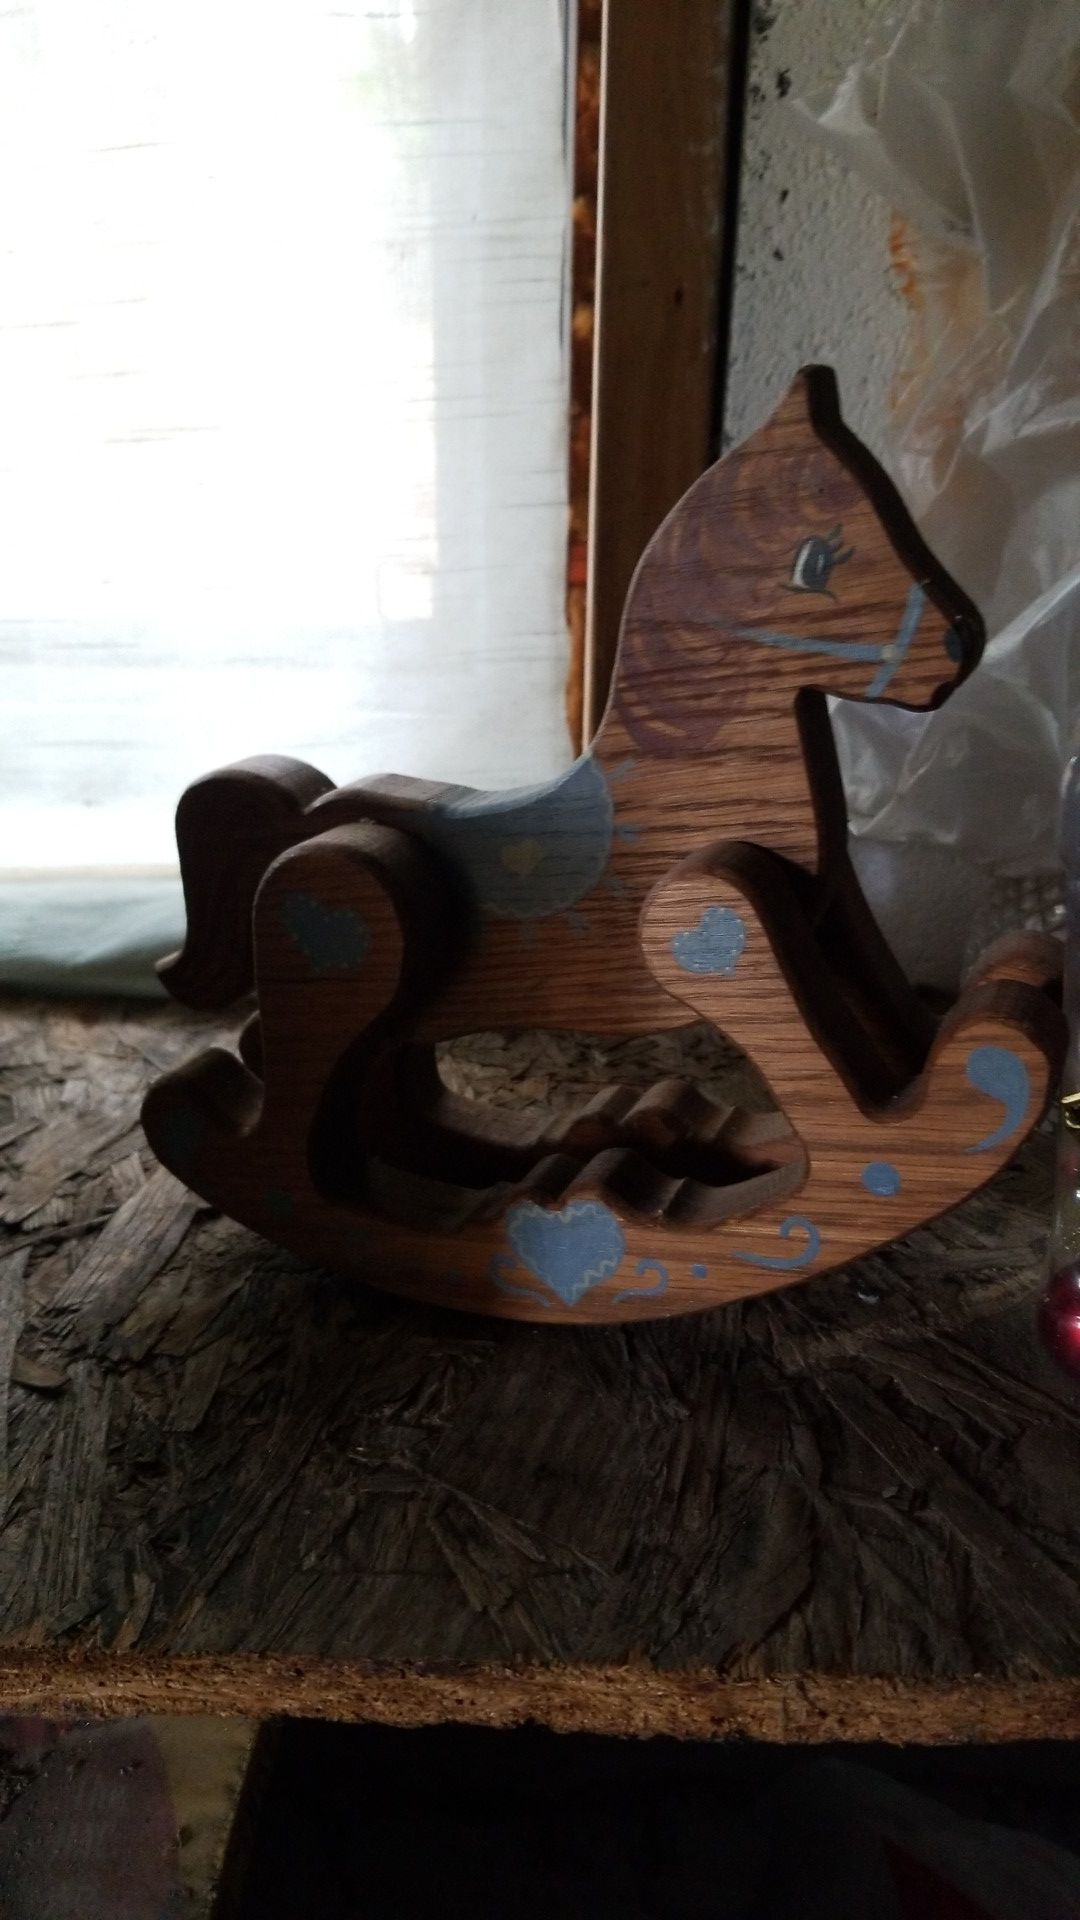 Small toy wooden rocking horse